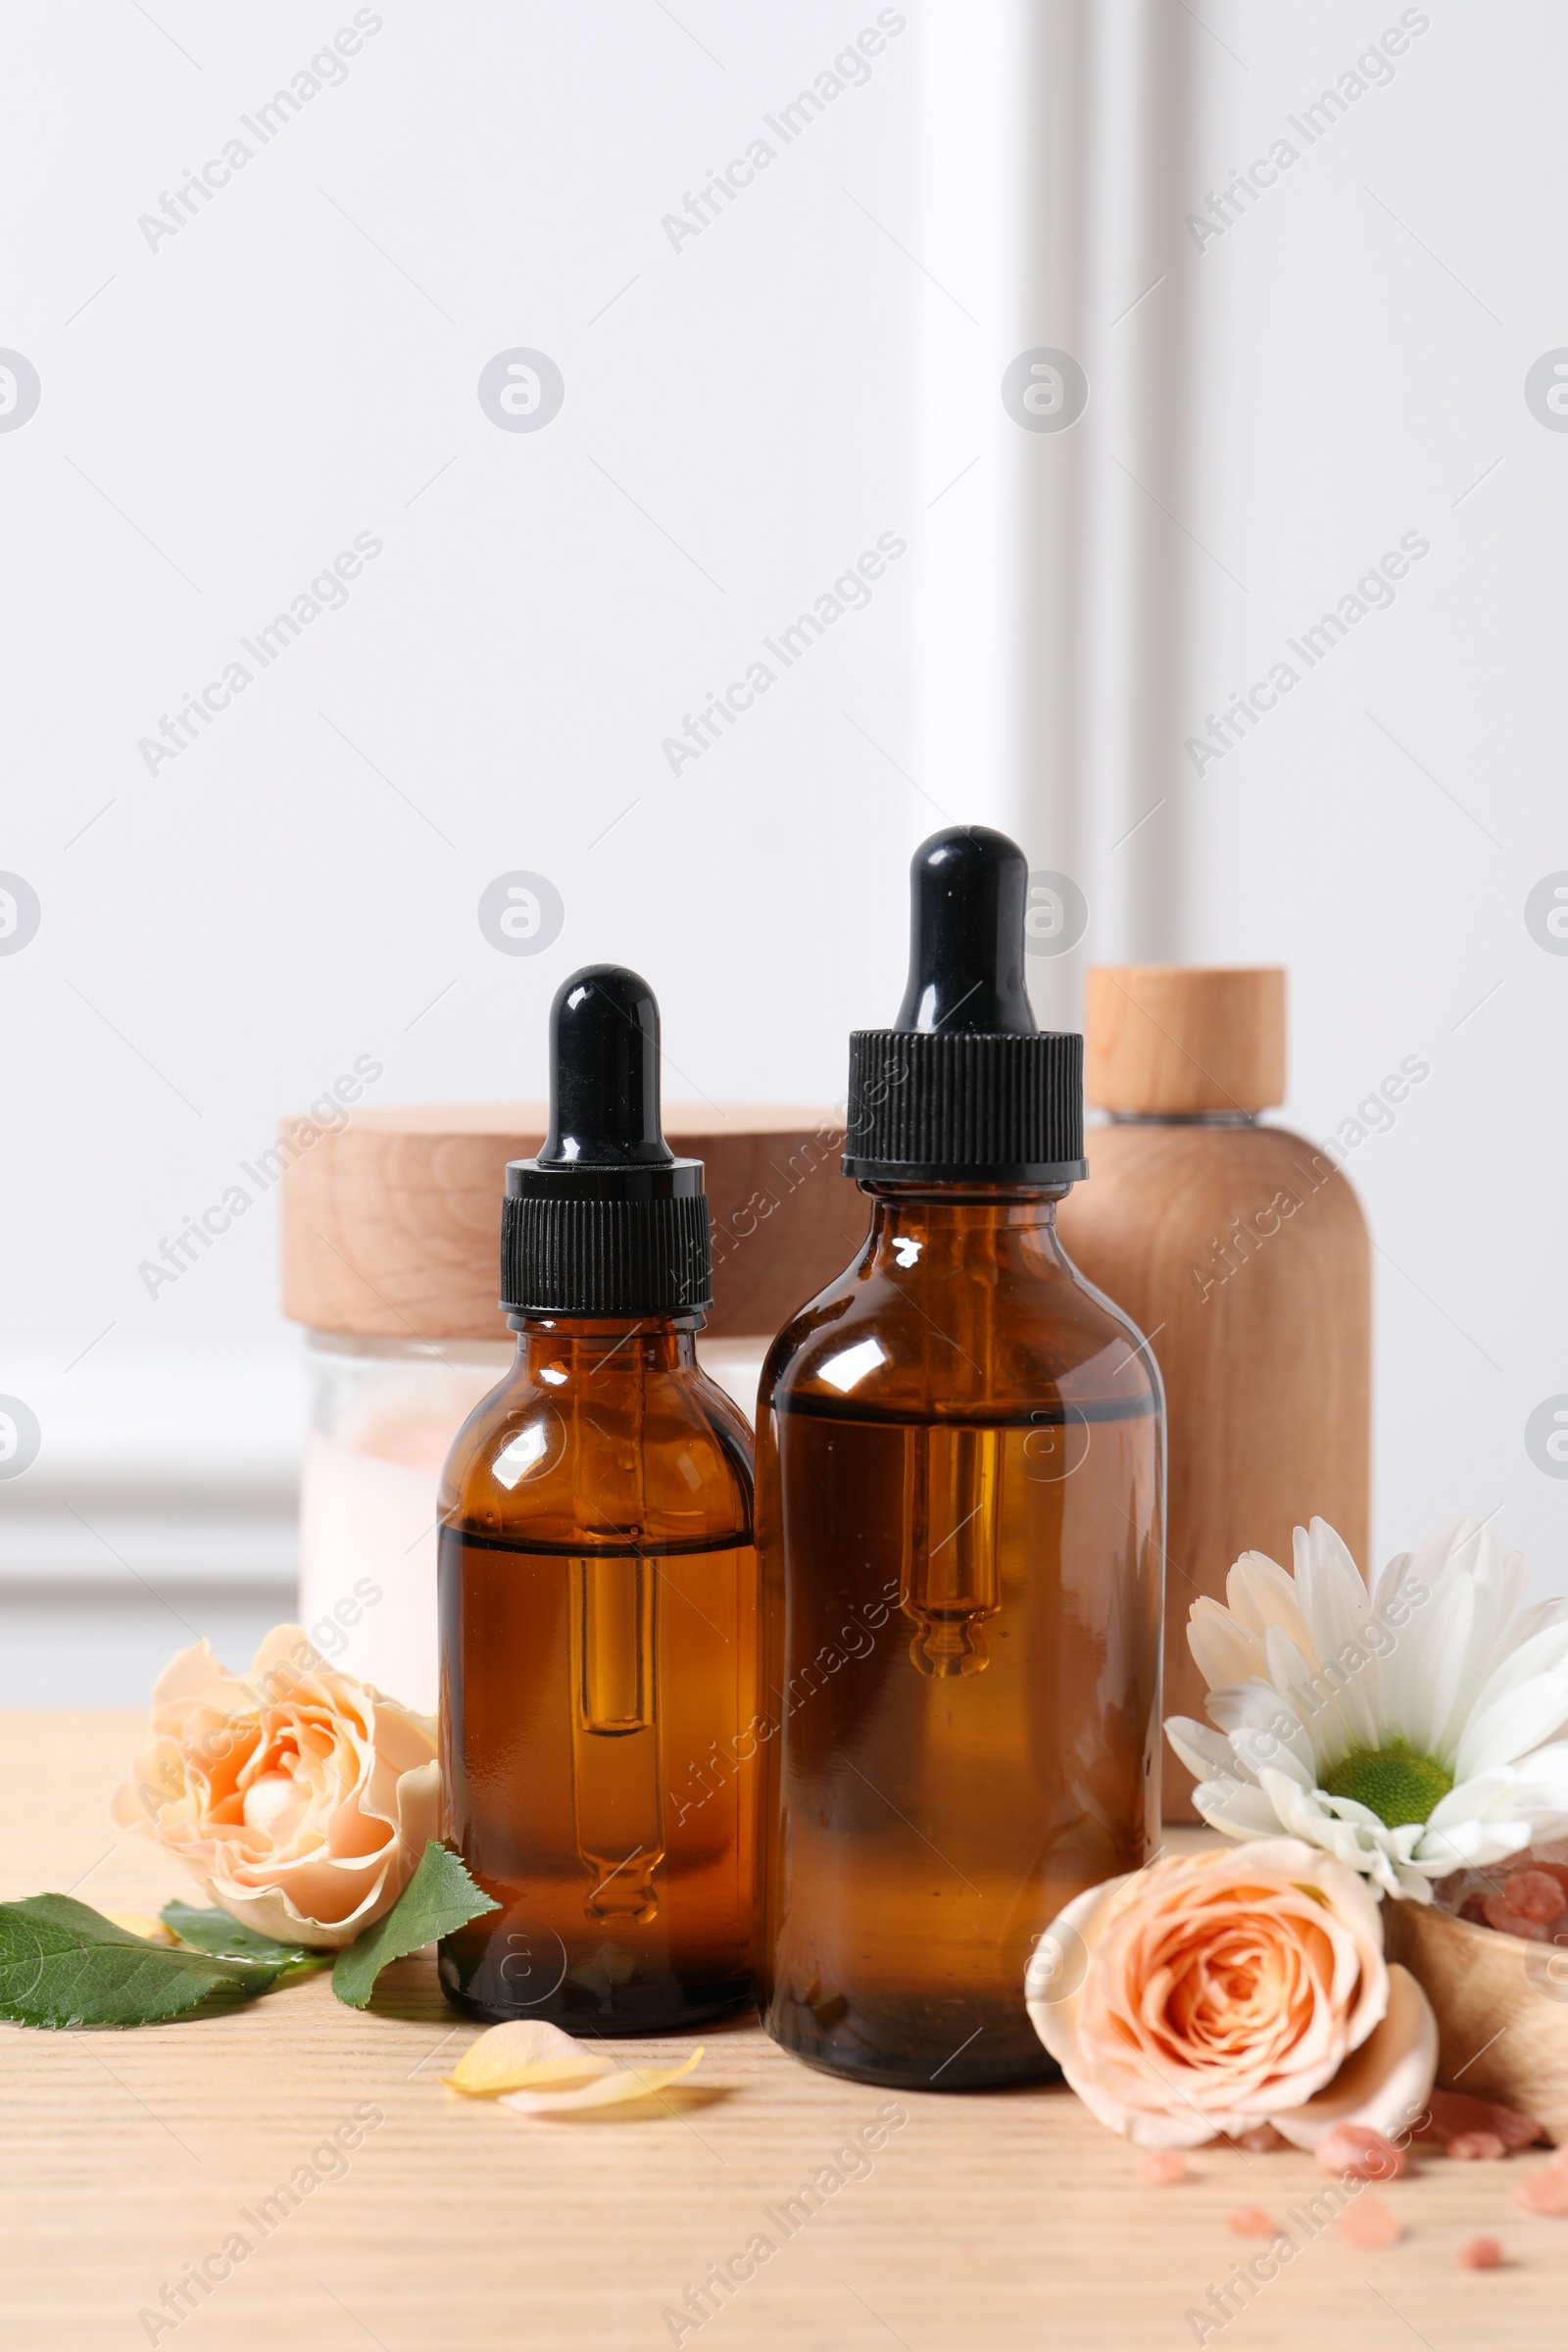 Photo of Bottles of cosmetic serum, beauty products and flowers on wooden table